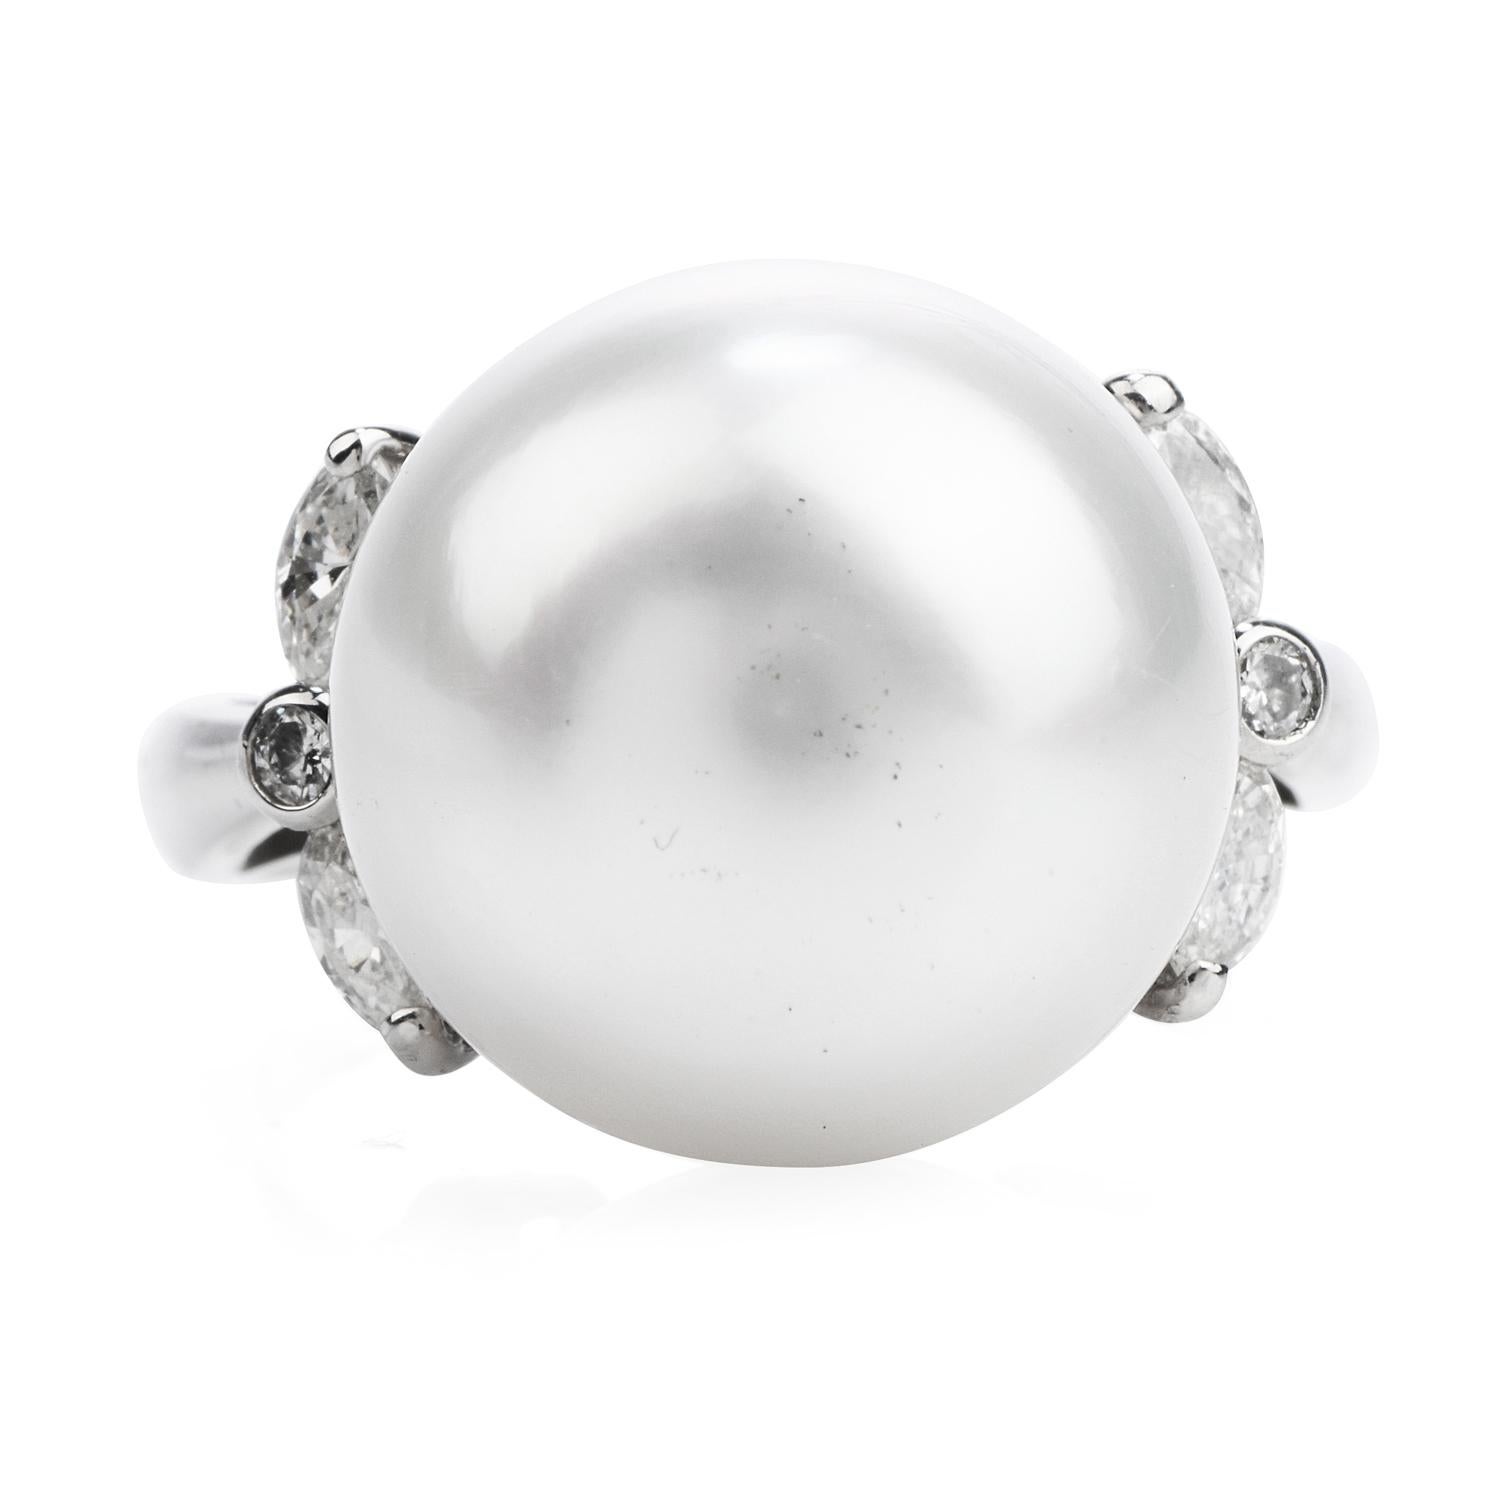 This elegant pearl and diamond ring are crafted in solid platinum, weighing 9.9 grams and measuring 14mm x 15mm high.

Showcasing a lustrous South Sea pearl of white tone, measuring 14mm.

Aside from 2 prong-set round-cut diamonds and 4 prong-set